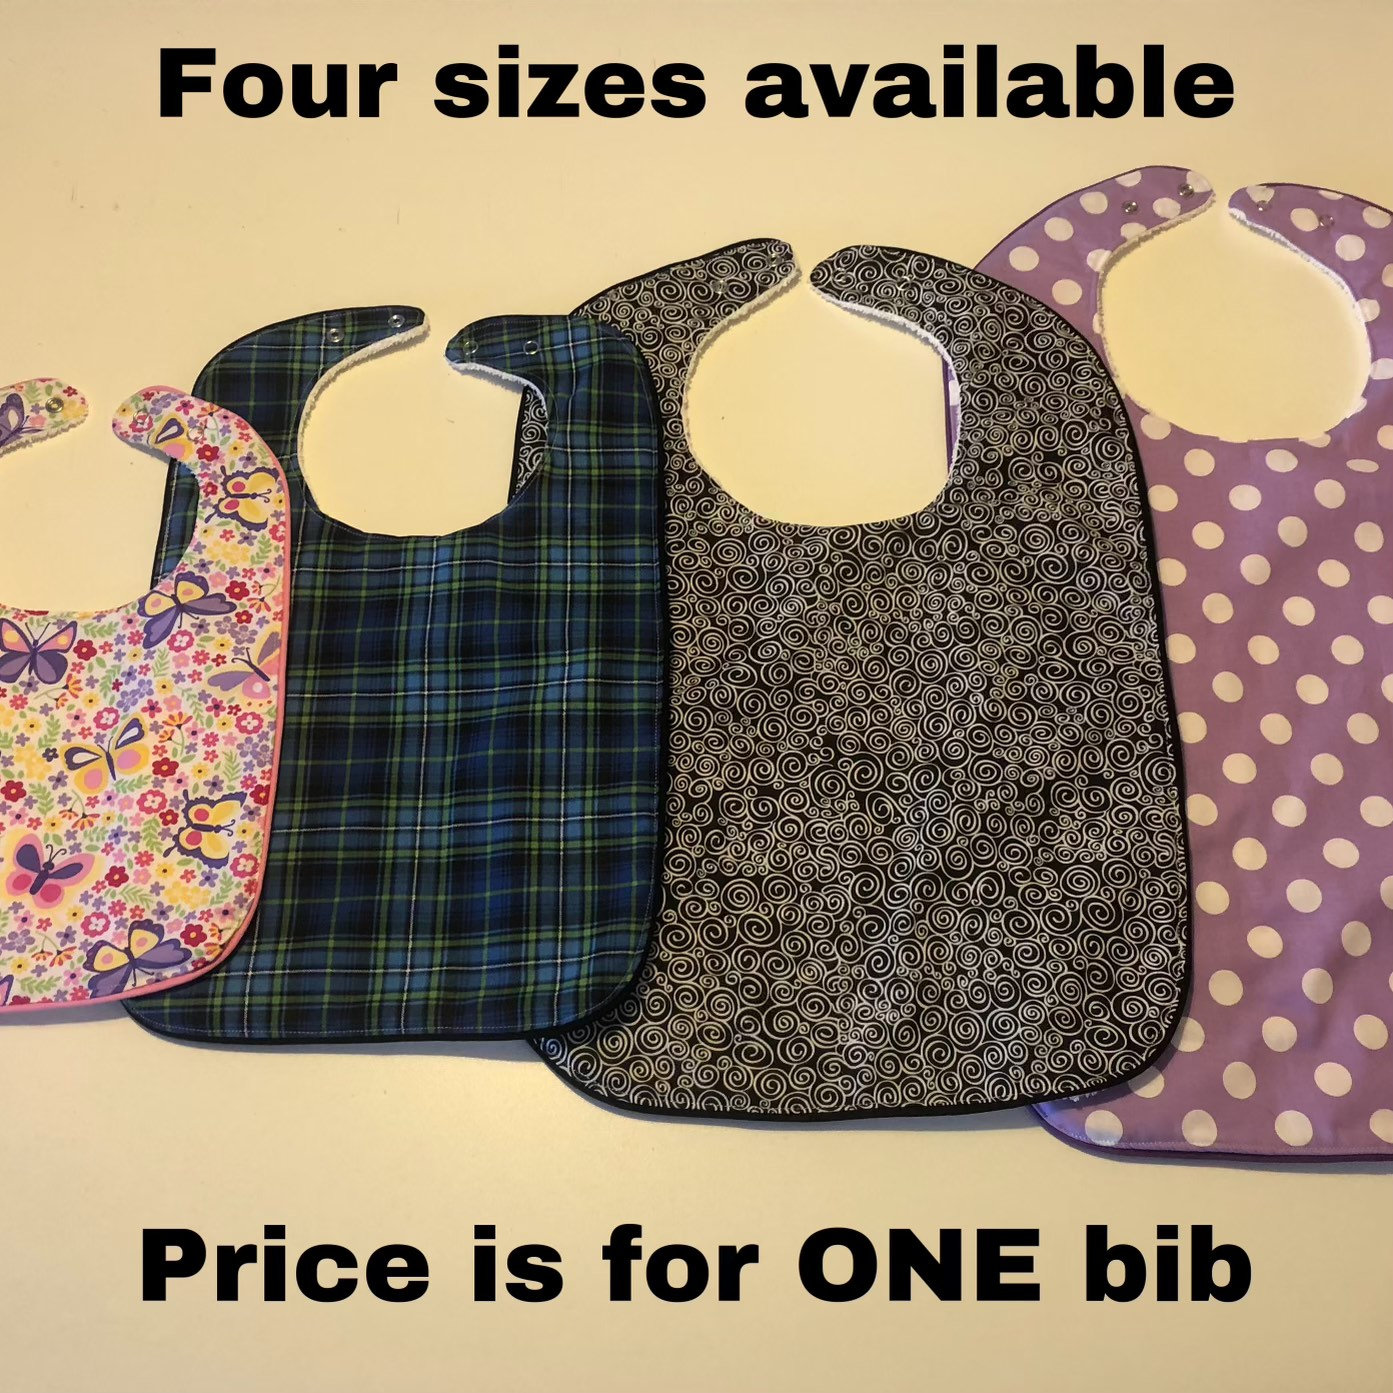 handmade bibs young adults to the elderly All custom designed for you set of 6 